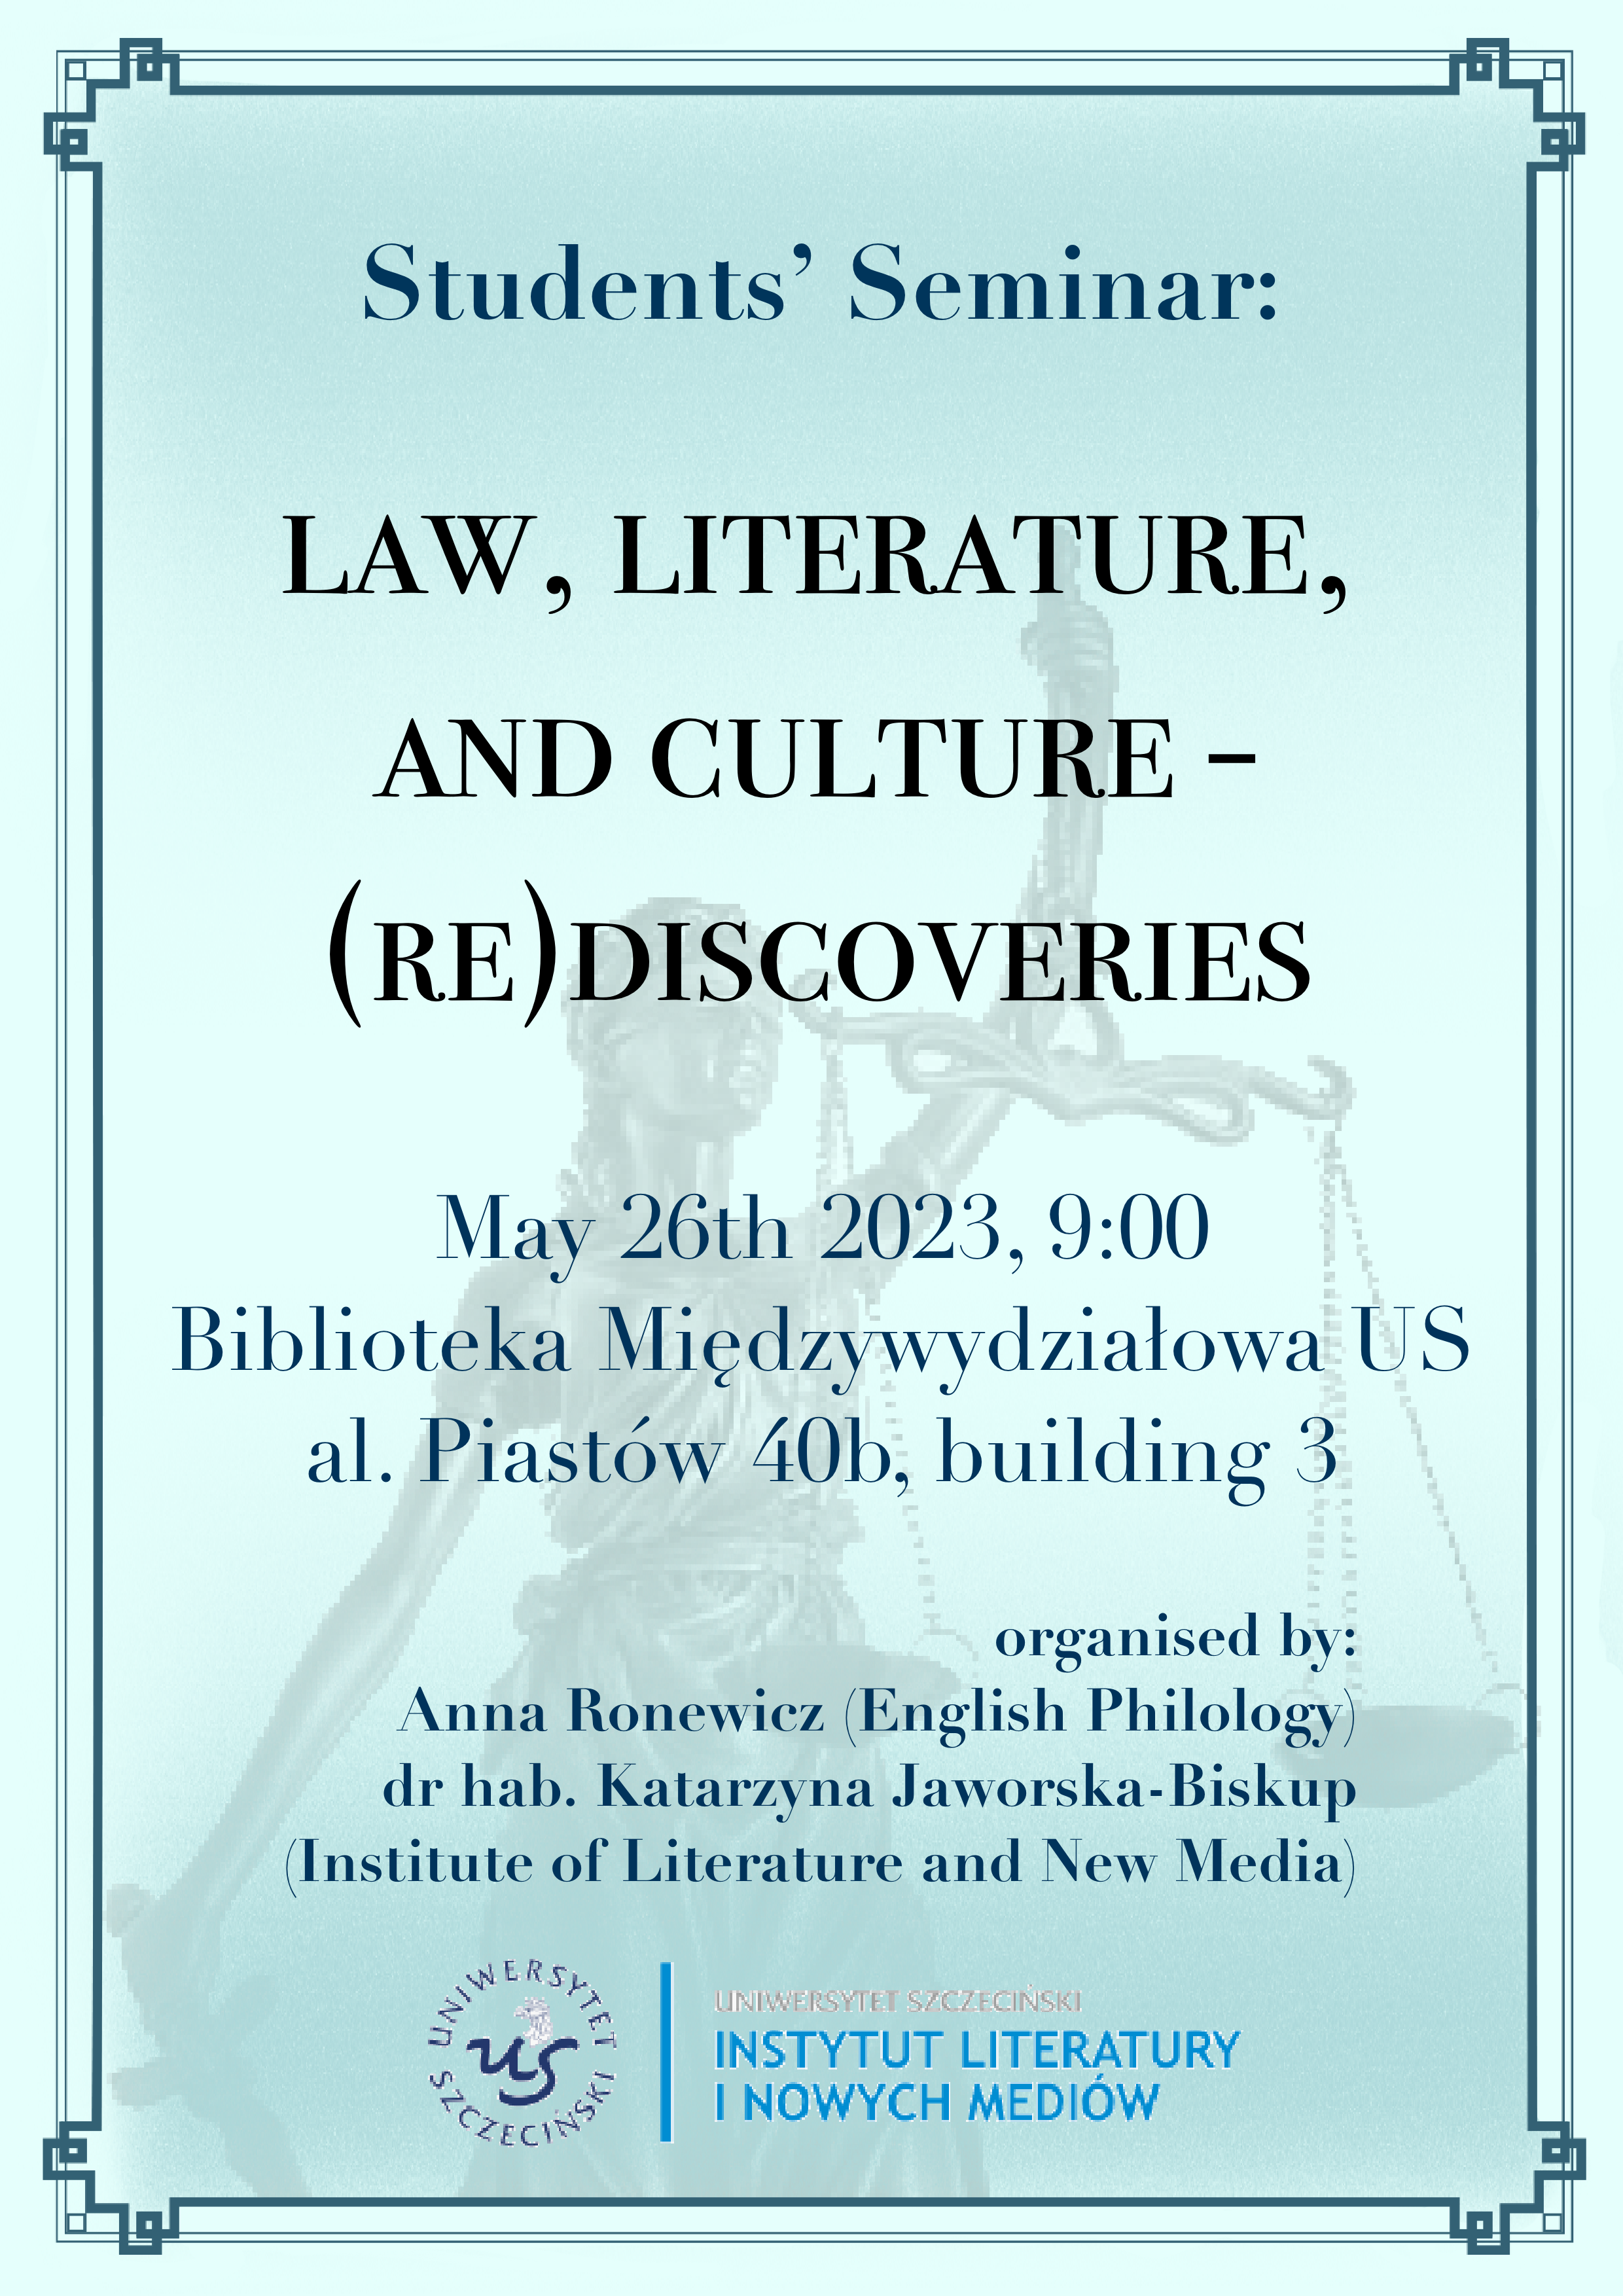 Students’ Seminar: Law, literature and culture: (re)discoveries – 26 maja 2023 r.